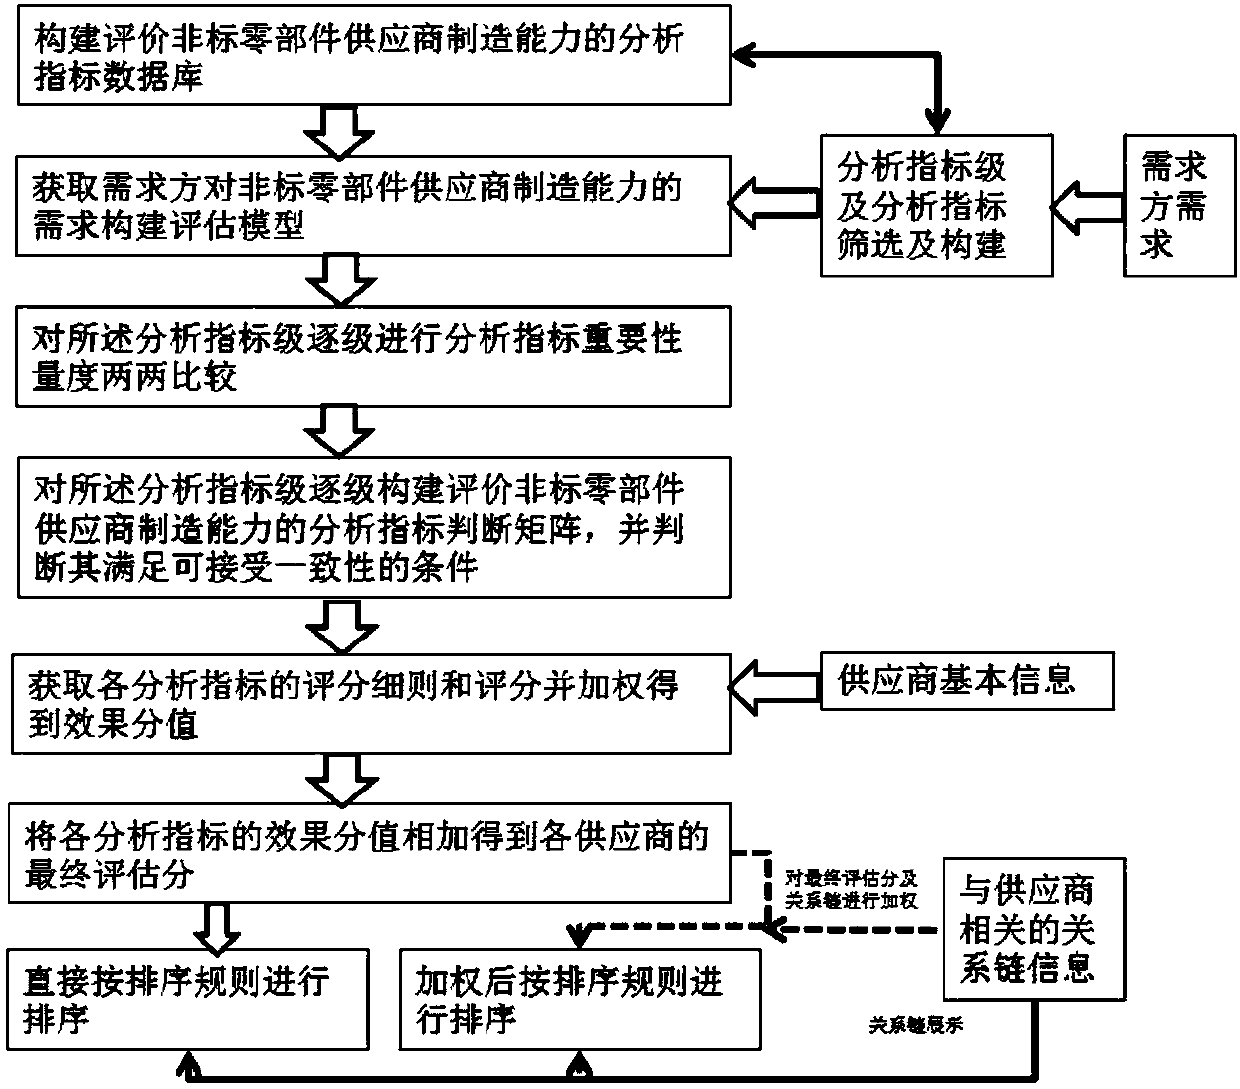 Non-standard part purchasing decision-making system based on manufacturing capability and relation chain